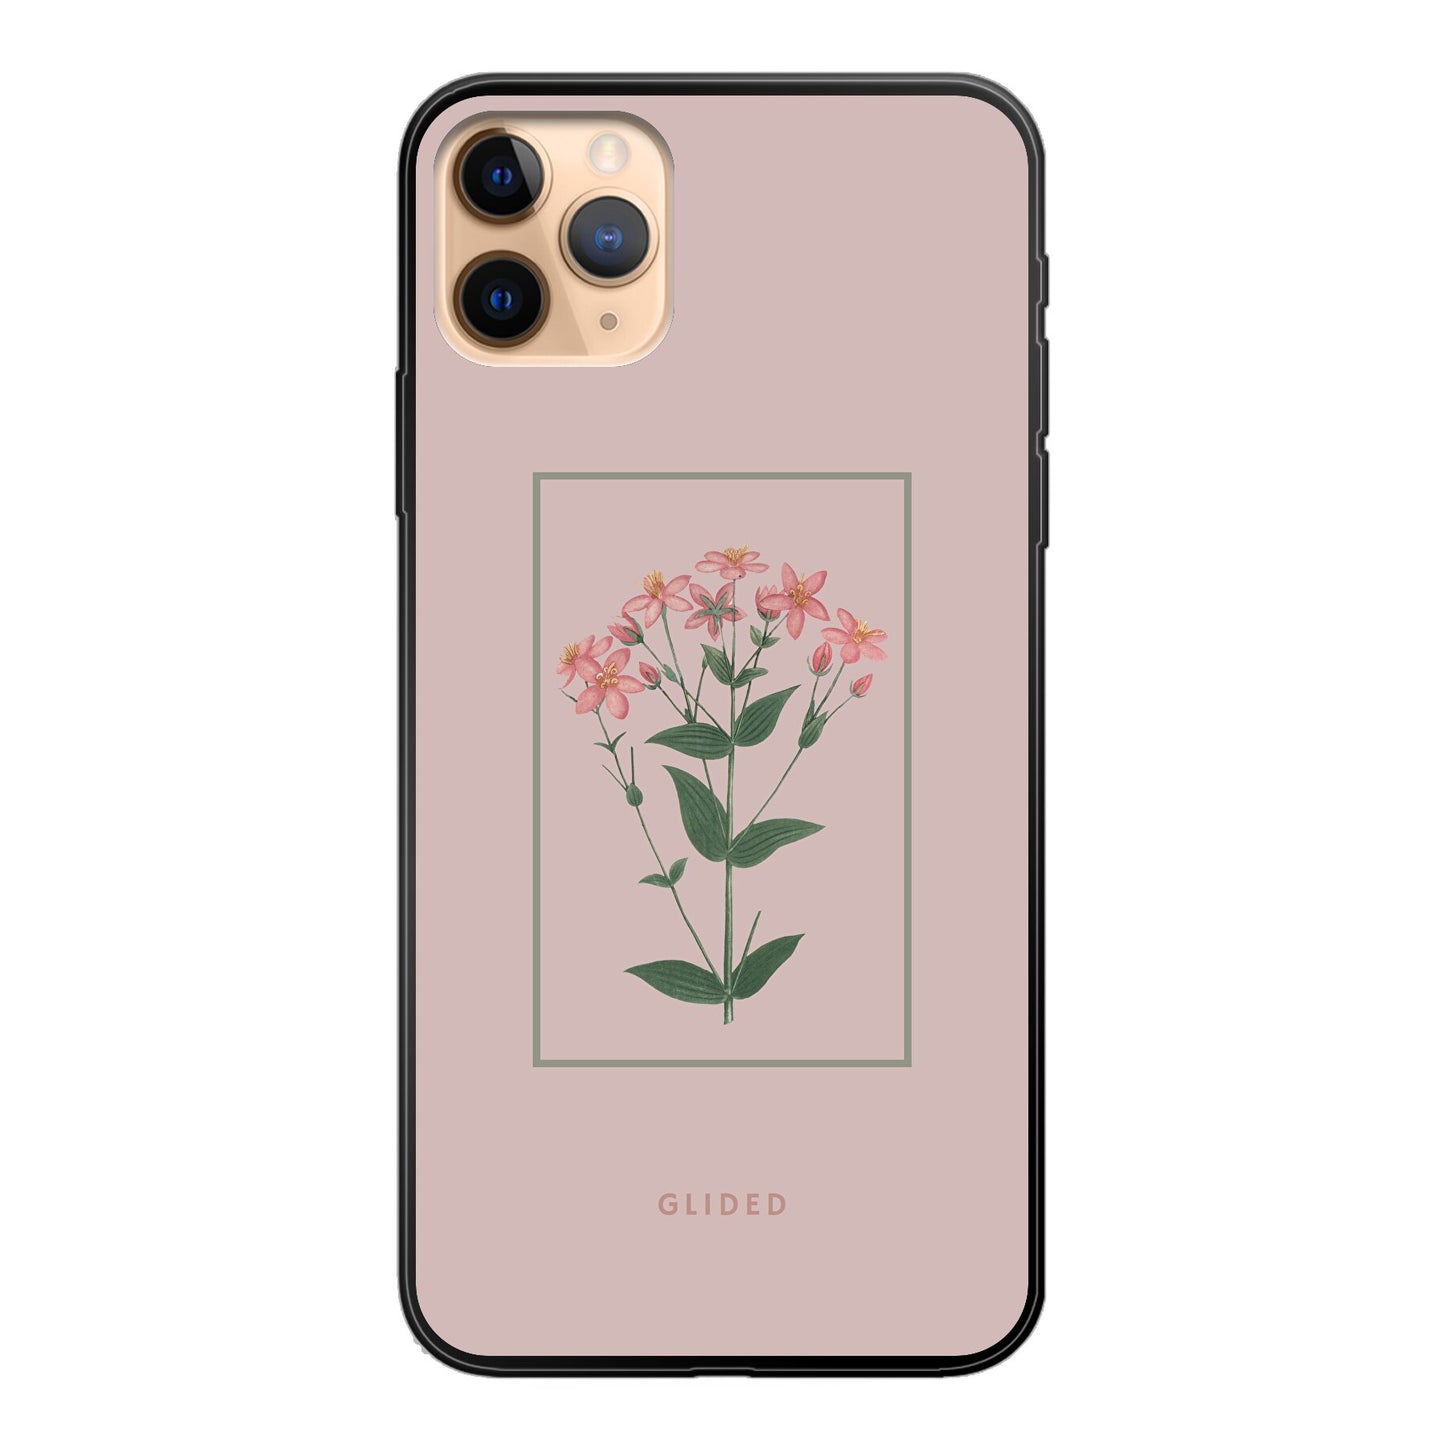 Blossy - iPhone 11 Pro Max Handyhülle Soft case